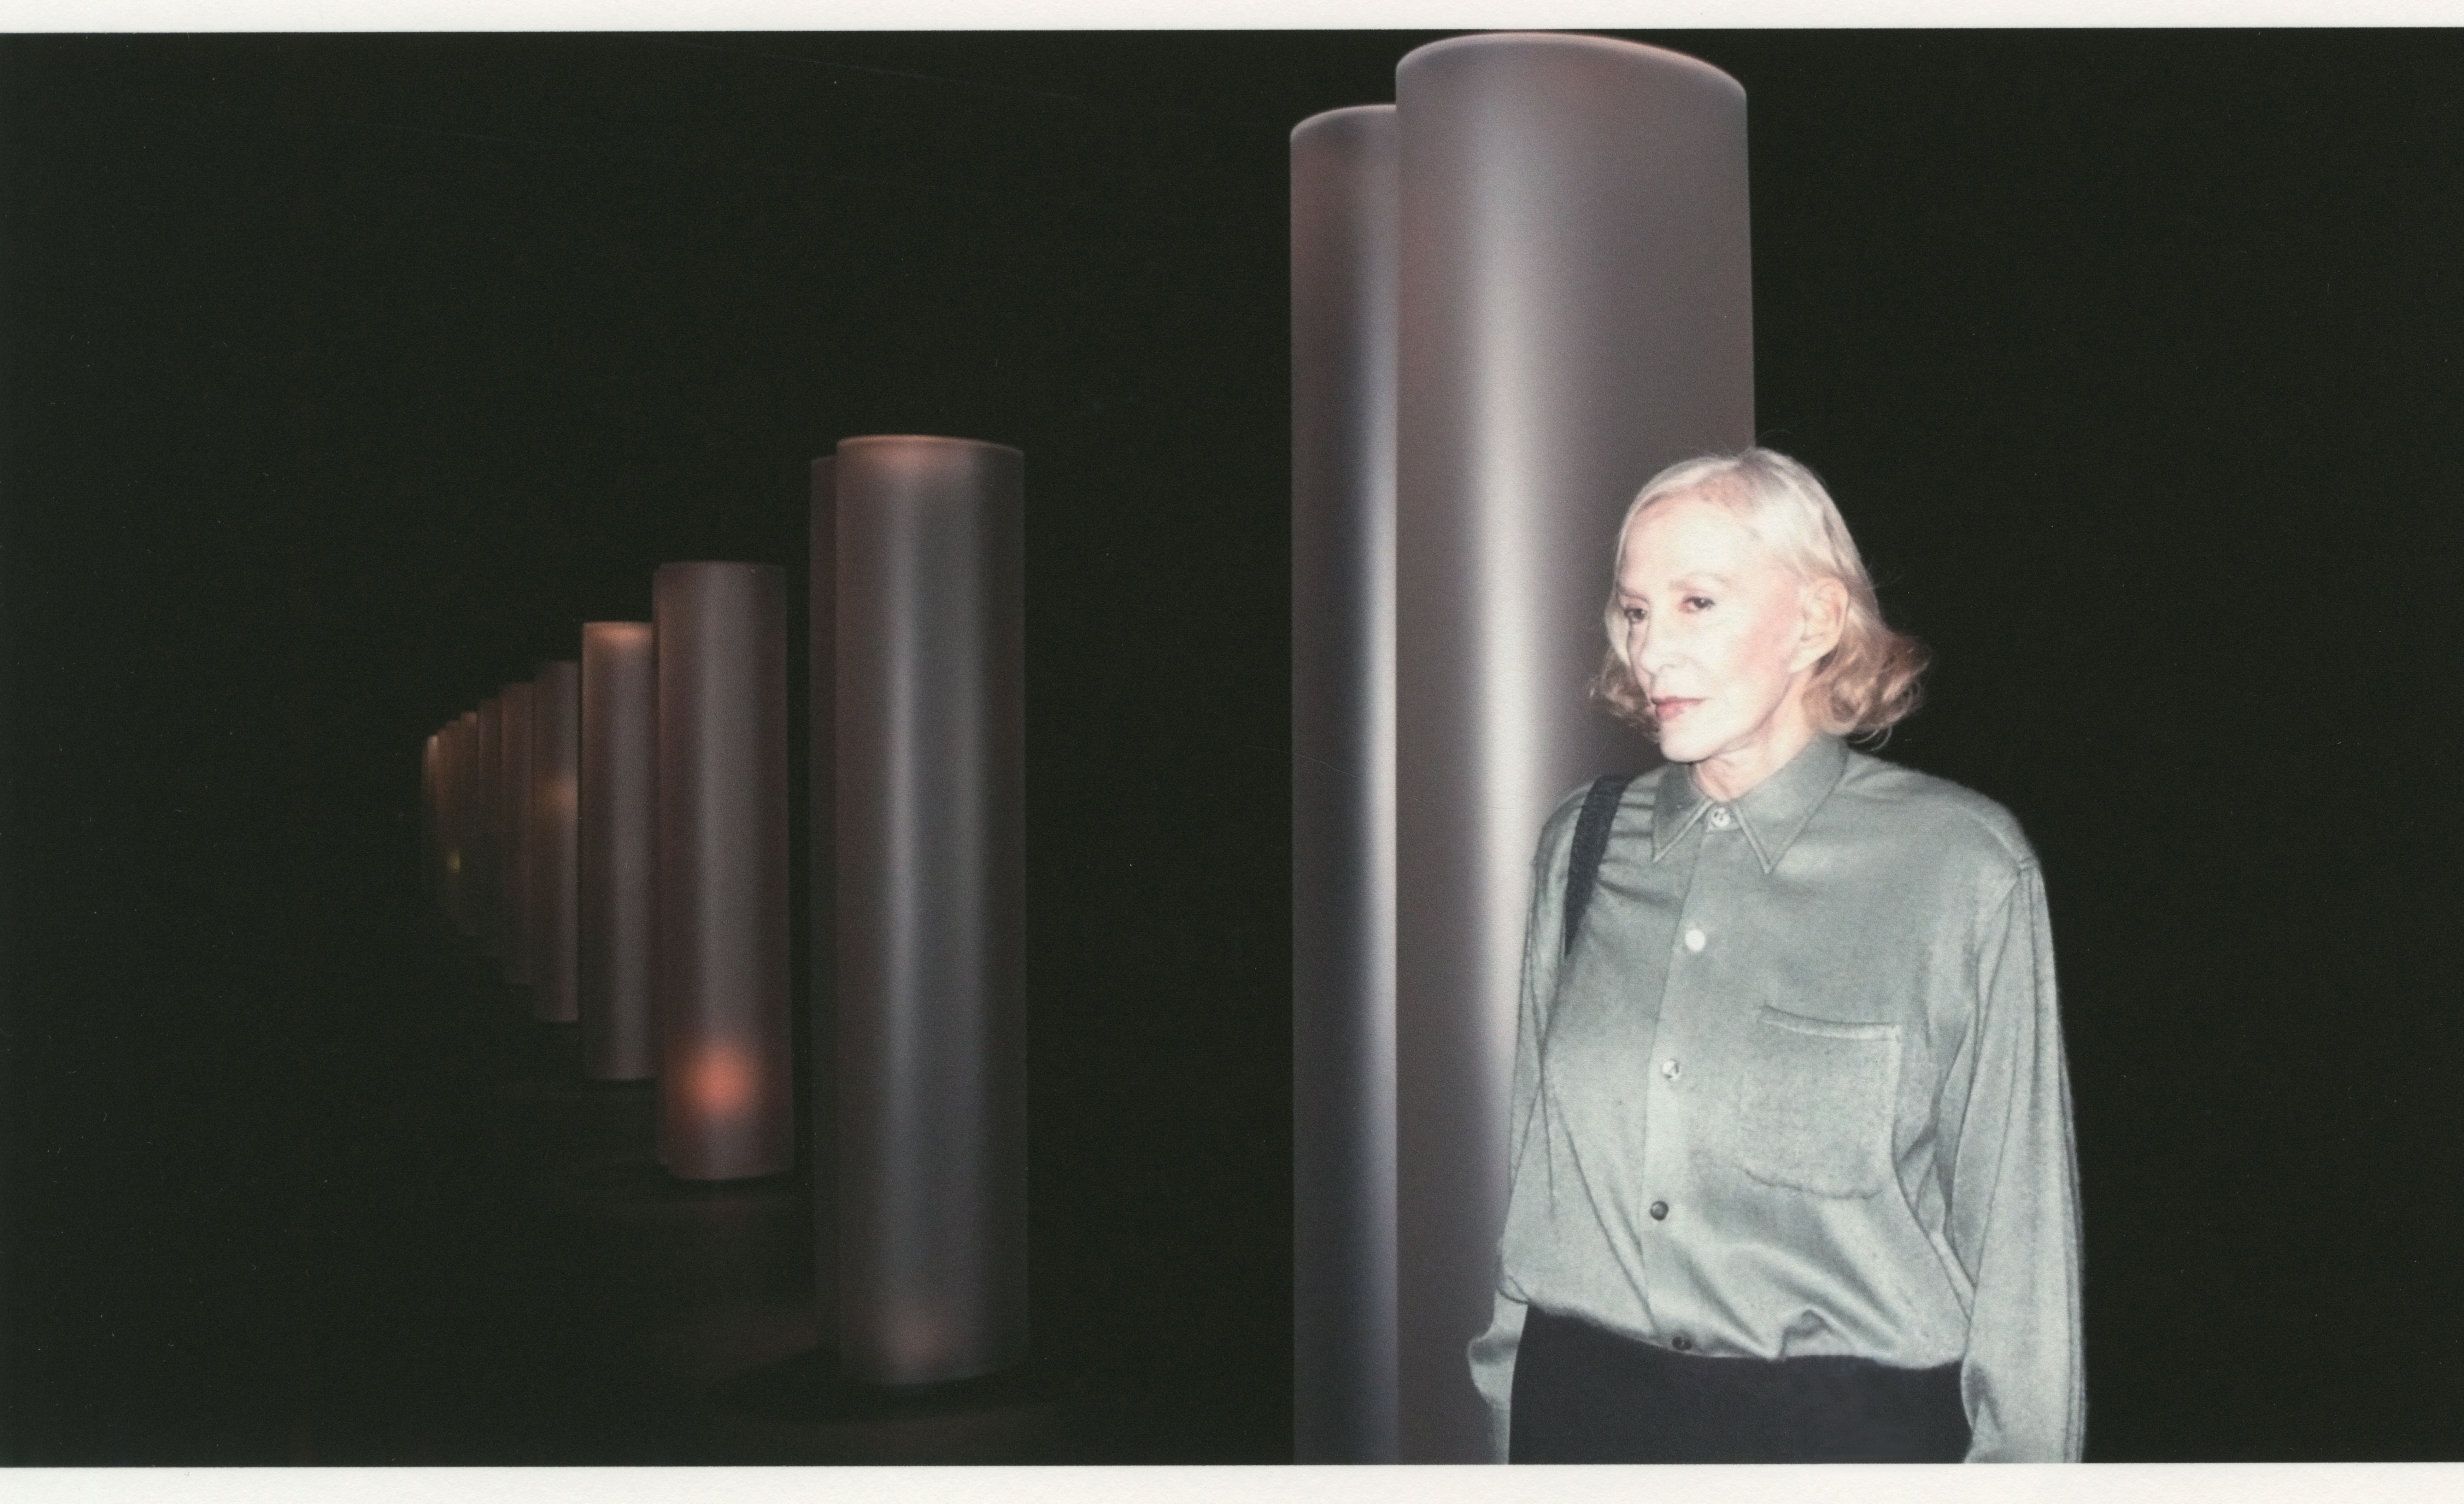 Light and Space pioneer Helen Pashgian at her 2014 LACMA exhibition. The artist has been an integral part of the Los Angeles art world for decades—beloved by curators, critics and fellow artists.